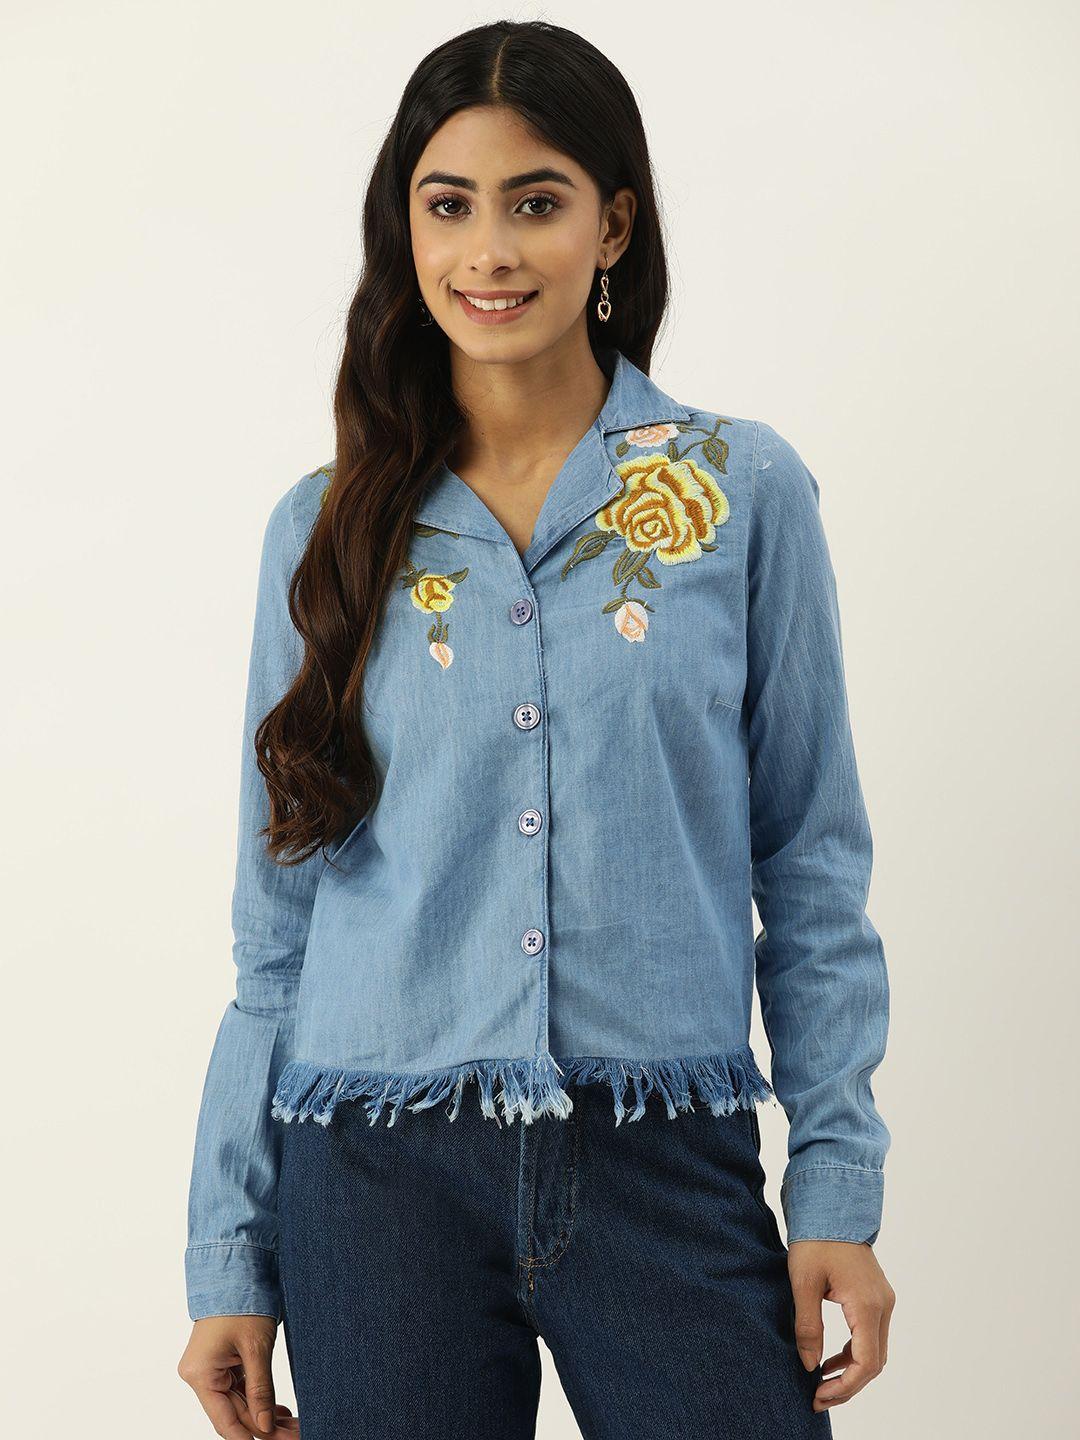 ix impression floral embroidered fringed pure cotton denim shirt style top